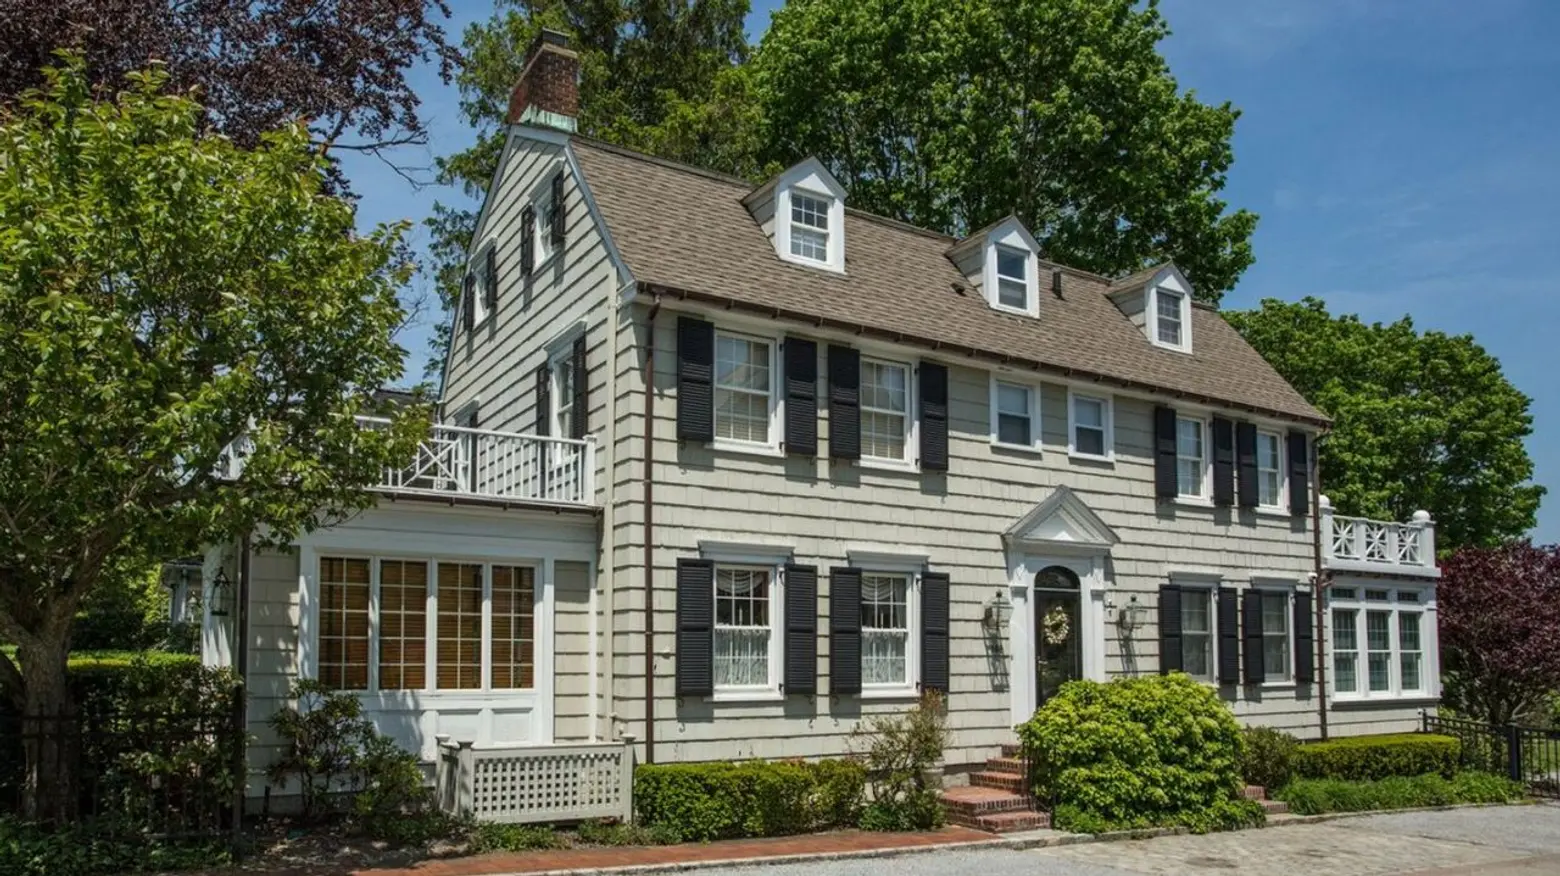 Long Island House Where ‘Amityville Horror’ Murders Occurred Asks $850,000